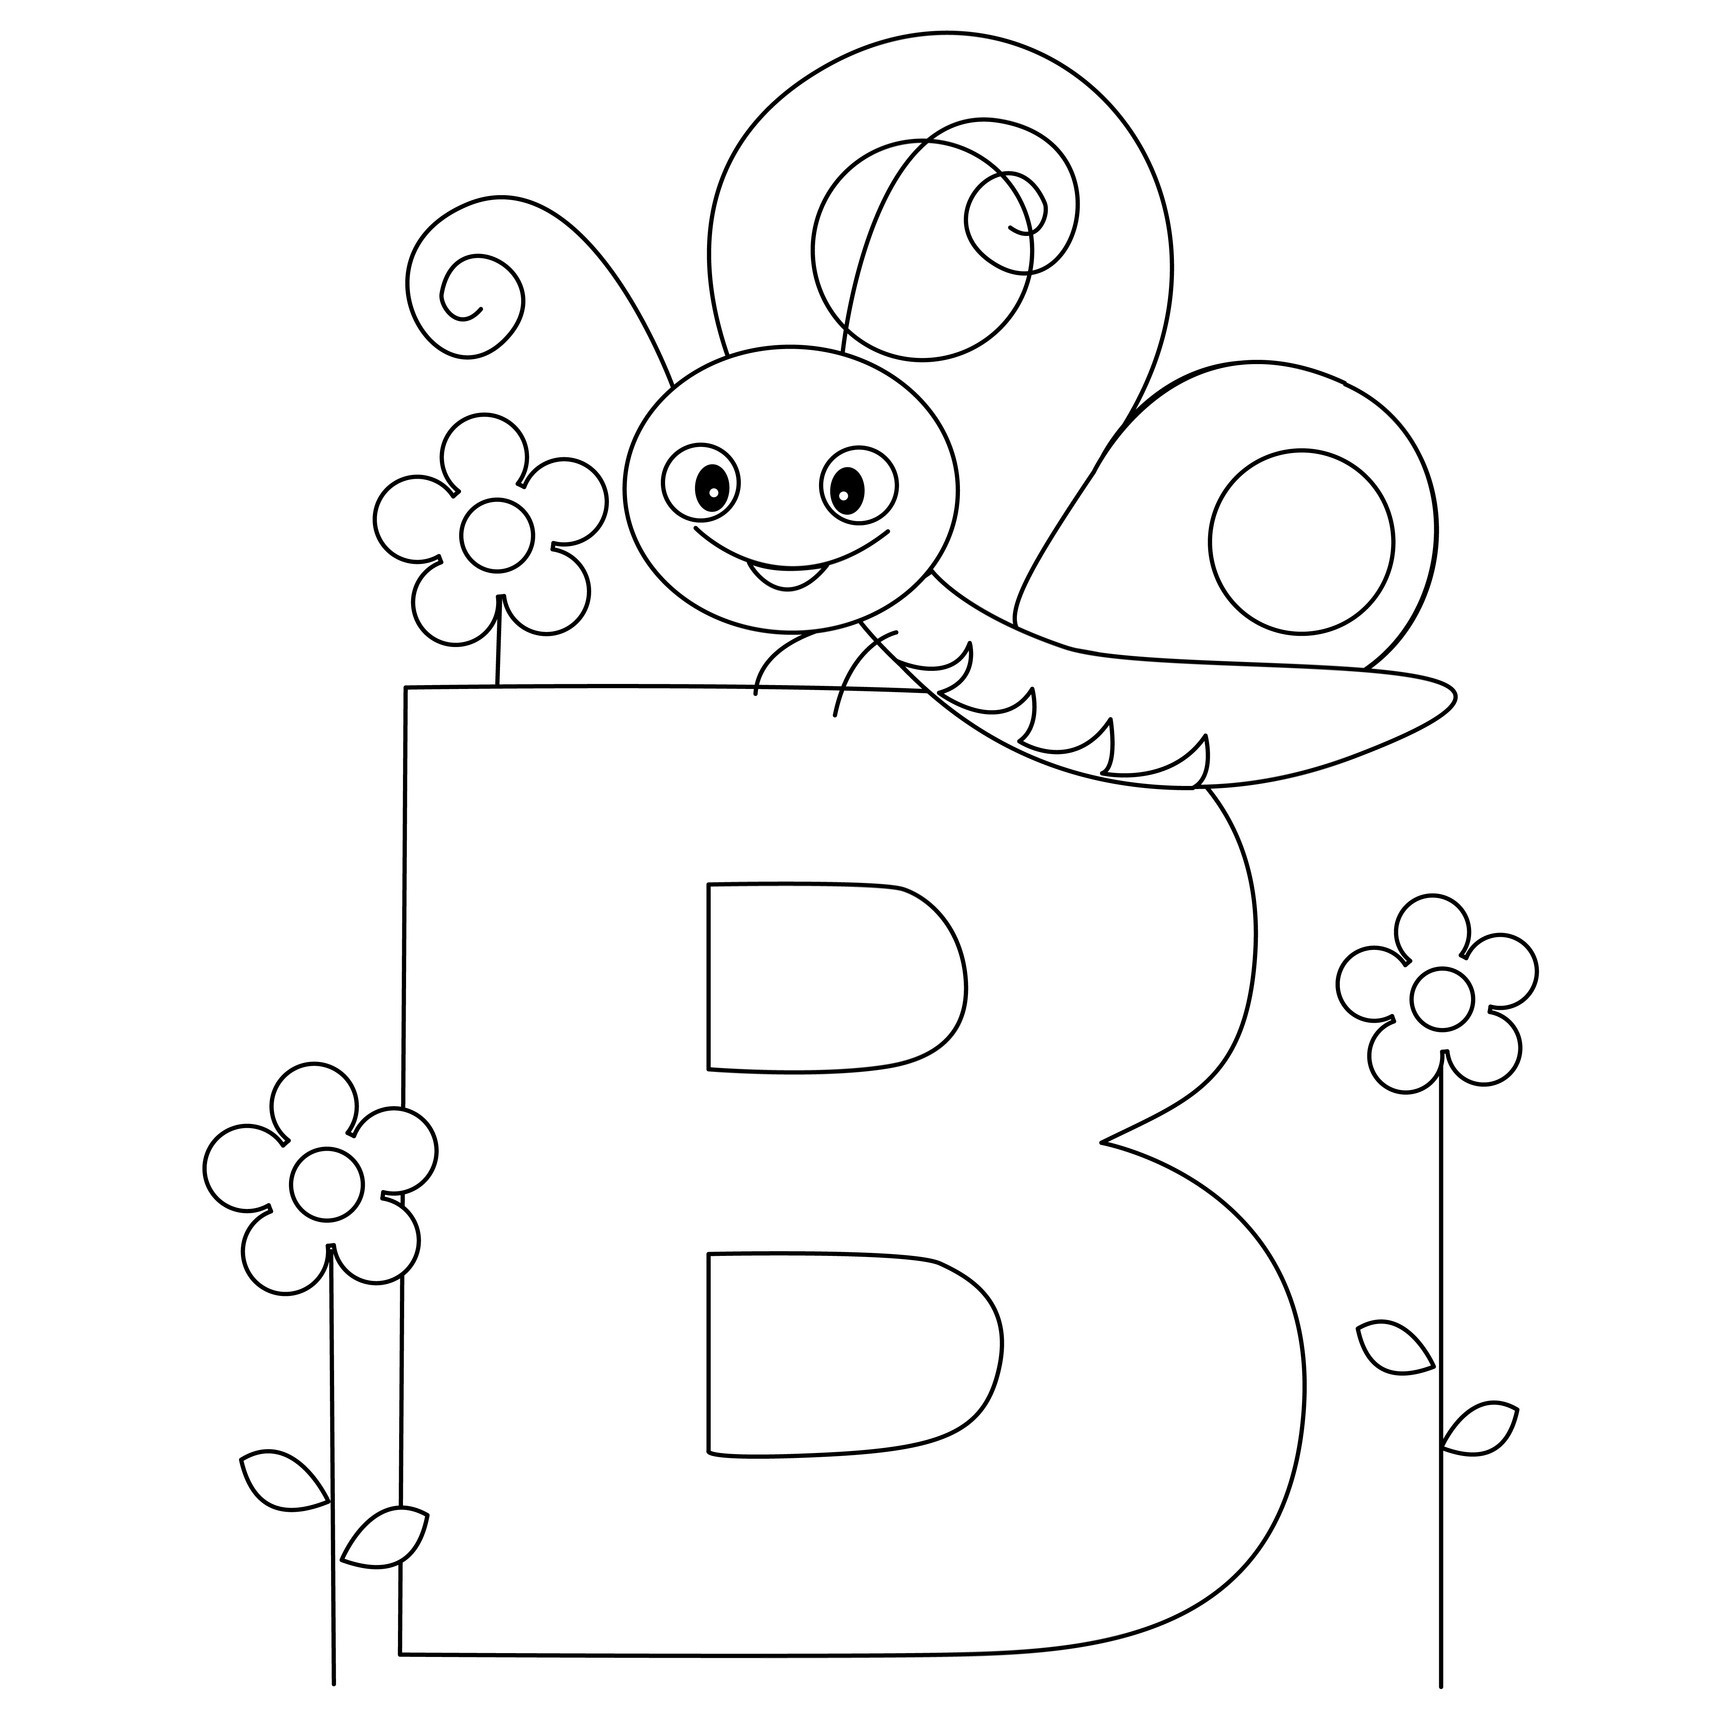 Coloring Pages : Free Printable Alphabet Coloring Pages For Kids - Free Printable Alphabet Letters Coloring Pages